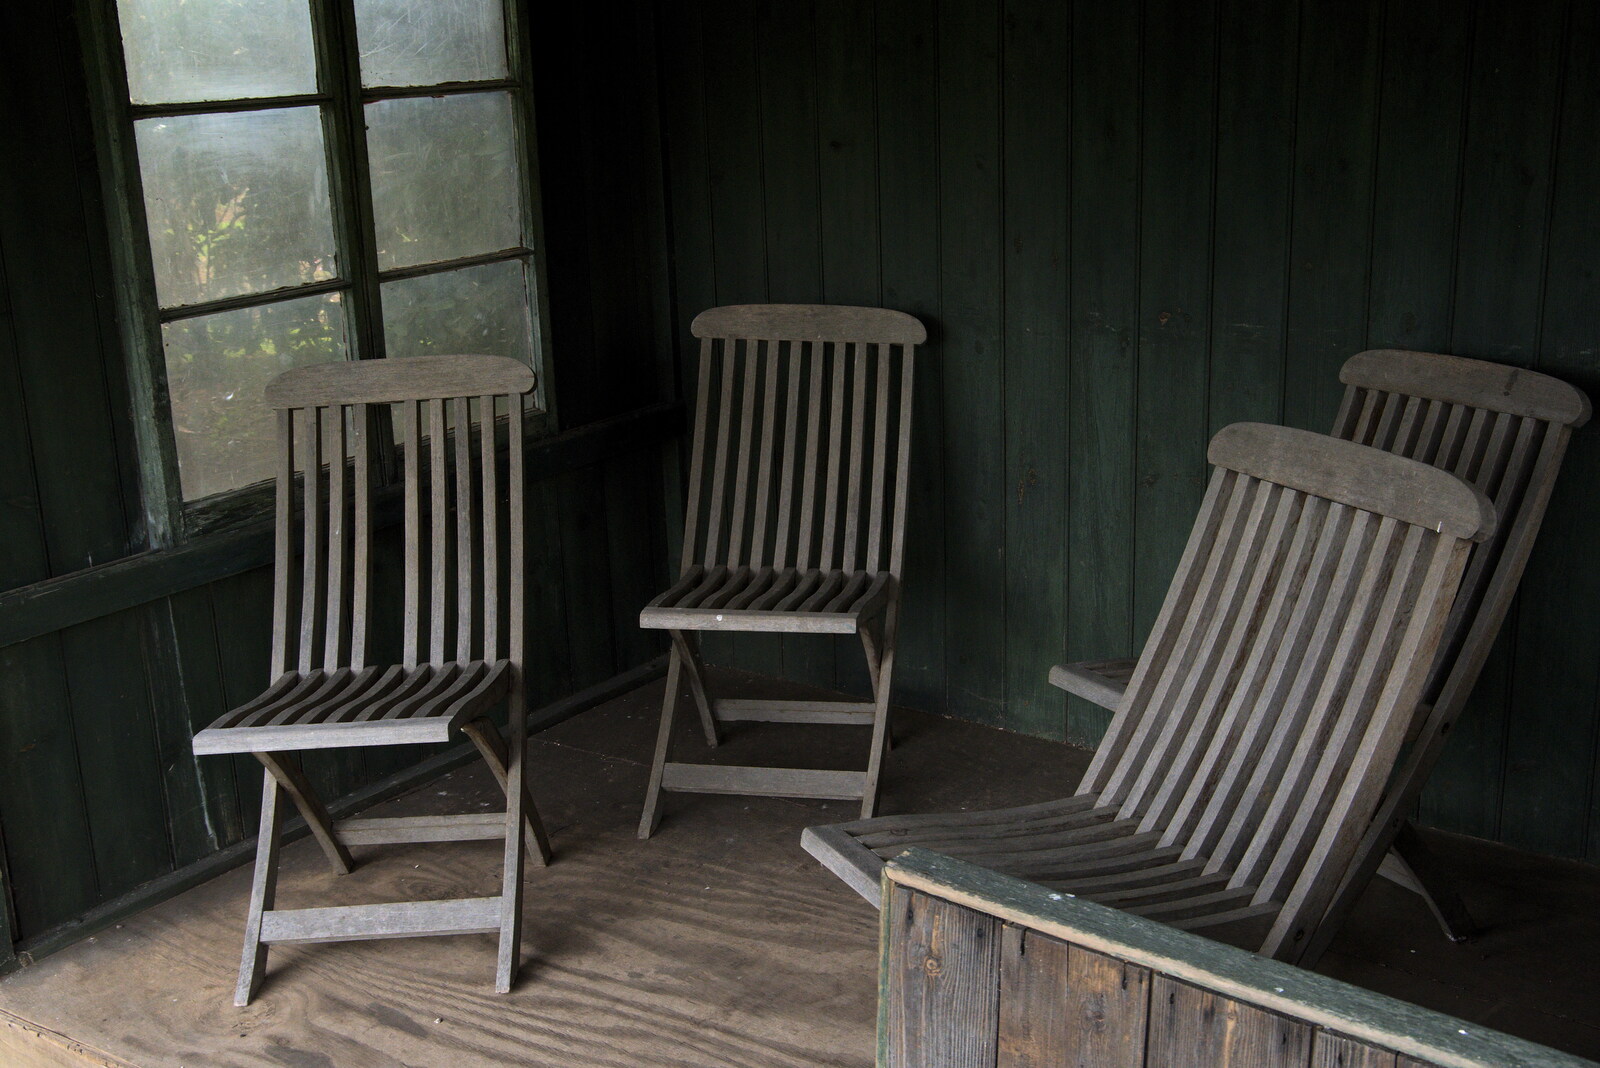 Four teak chairs in a garden house from A Return to Bressingham Steam and Gardens, Bressingham, Norfolk - 28th March 2021